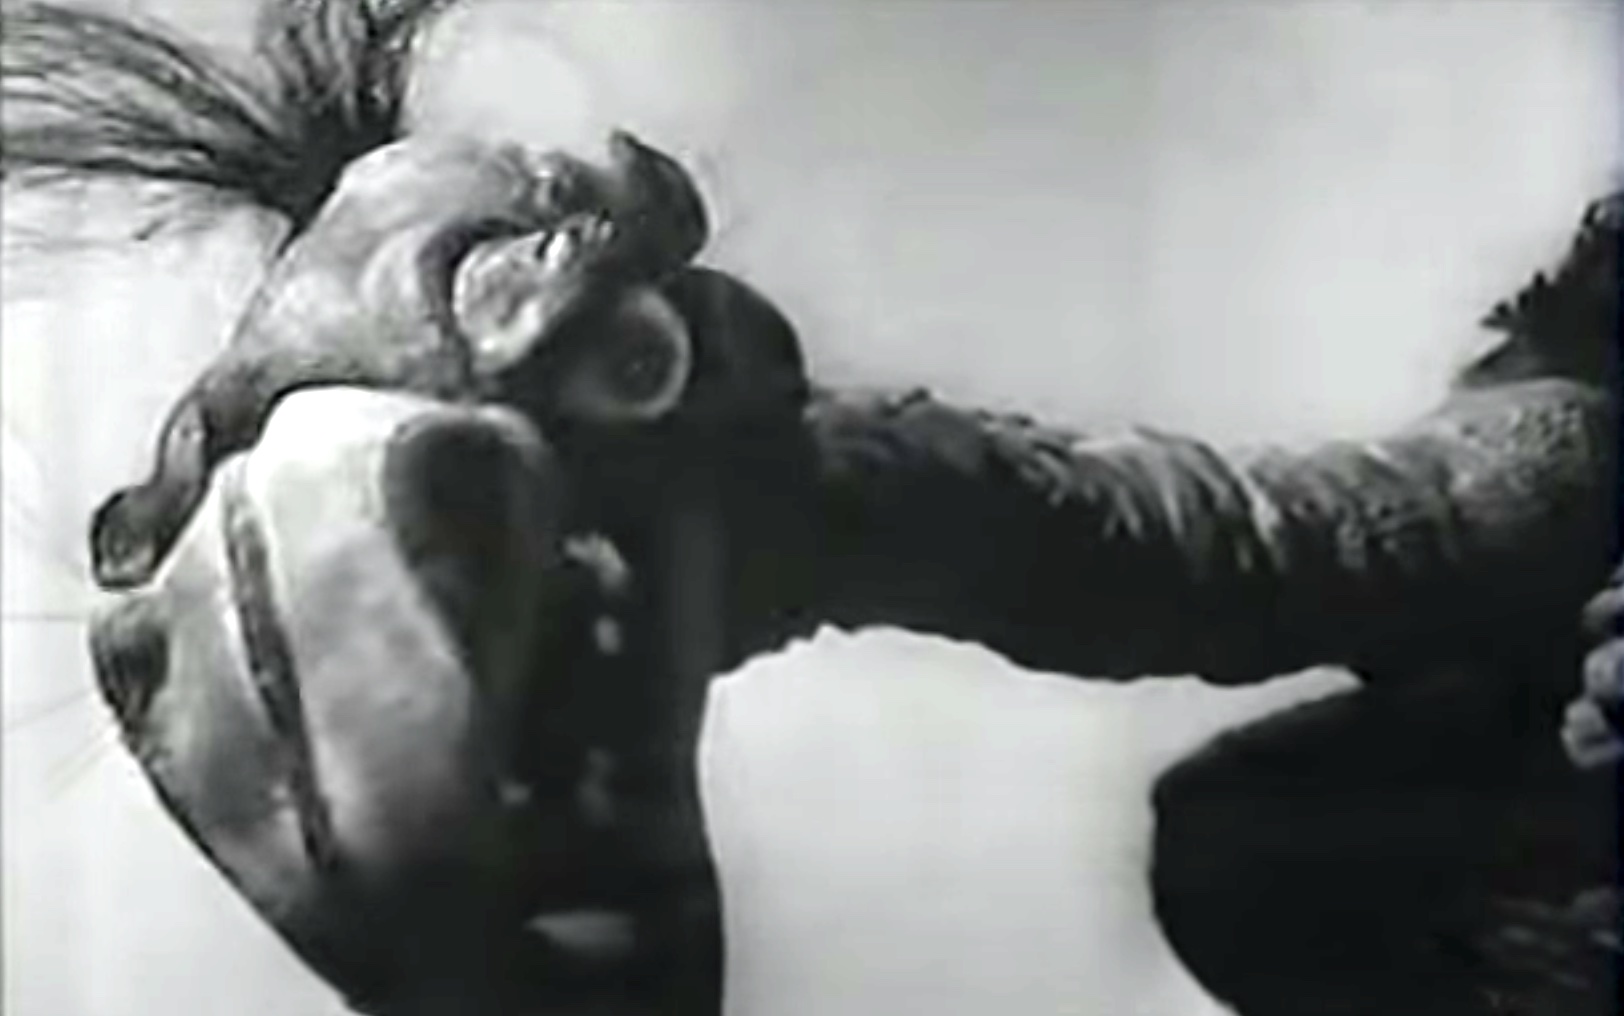 The puppet monster in "The Giant Claw"